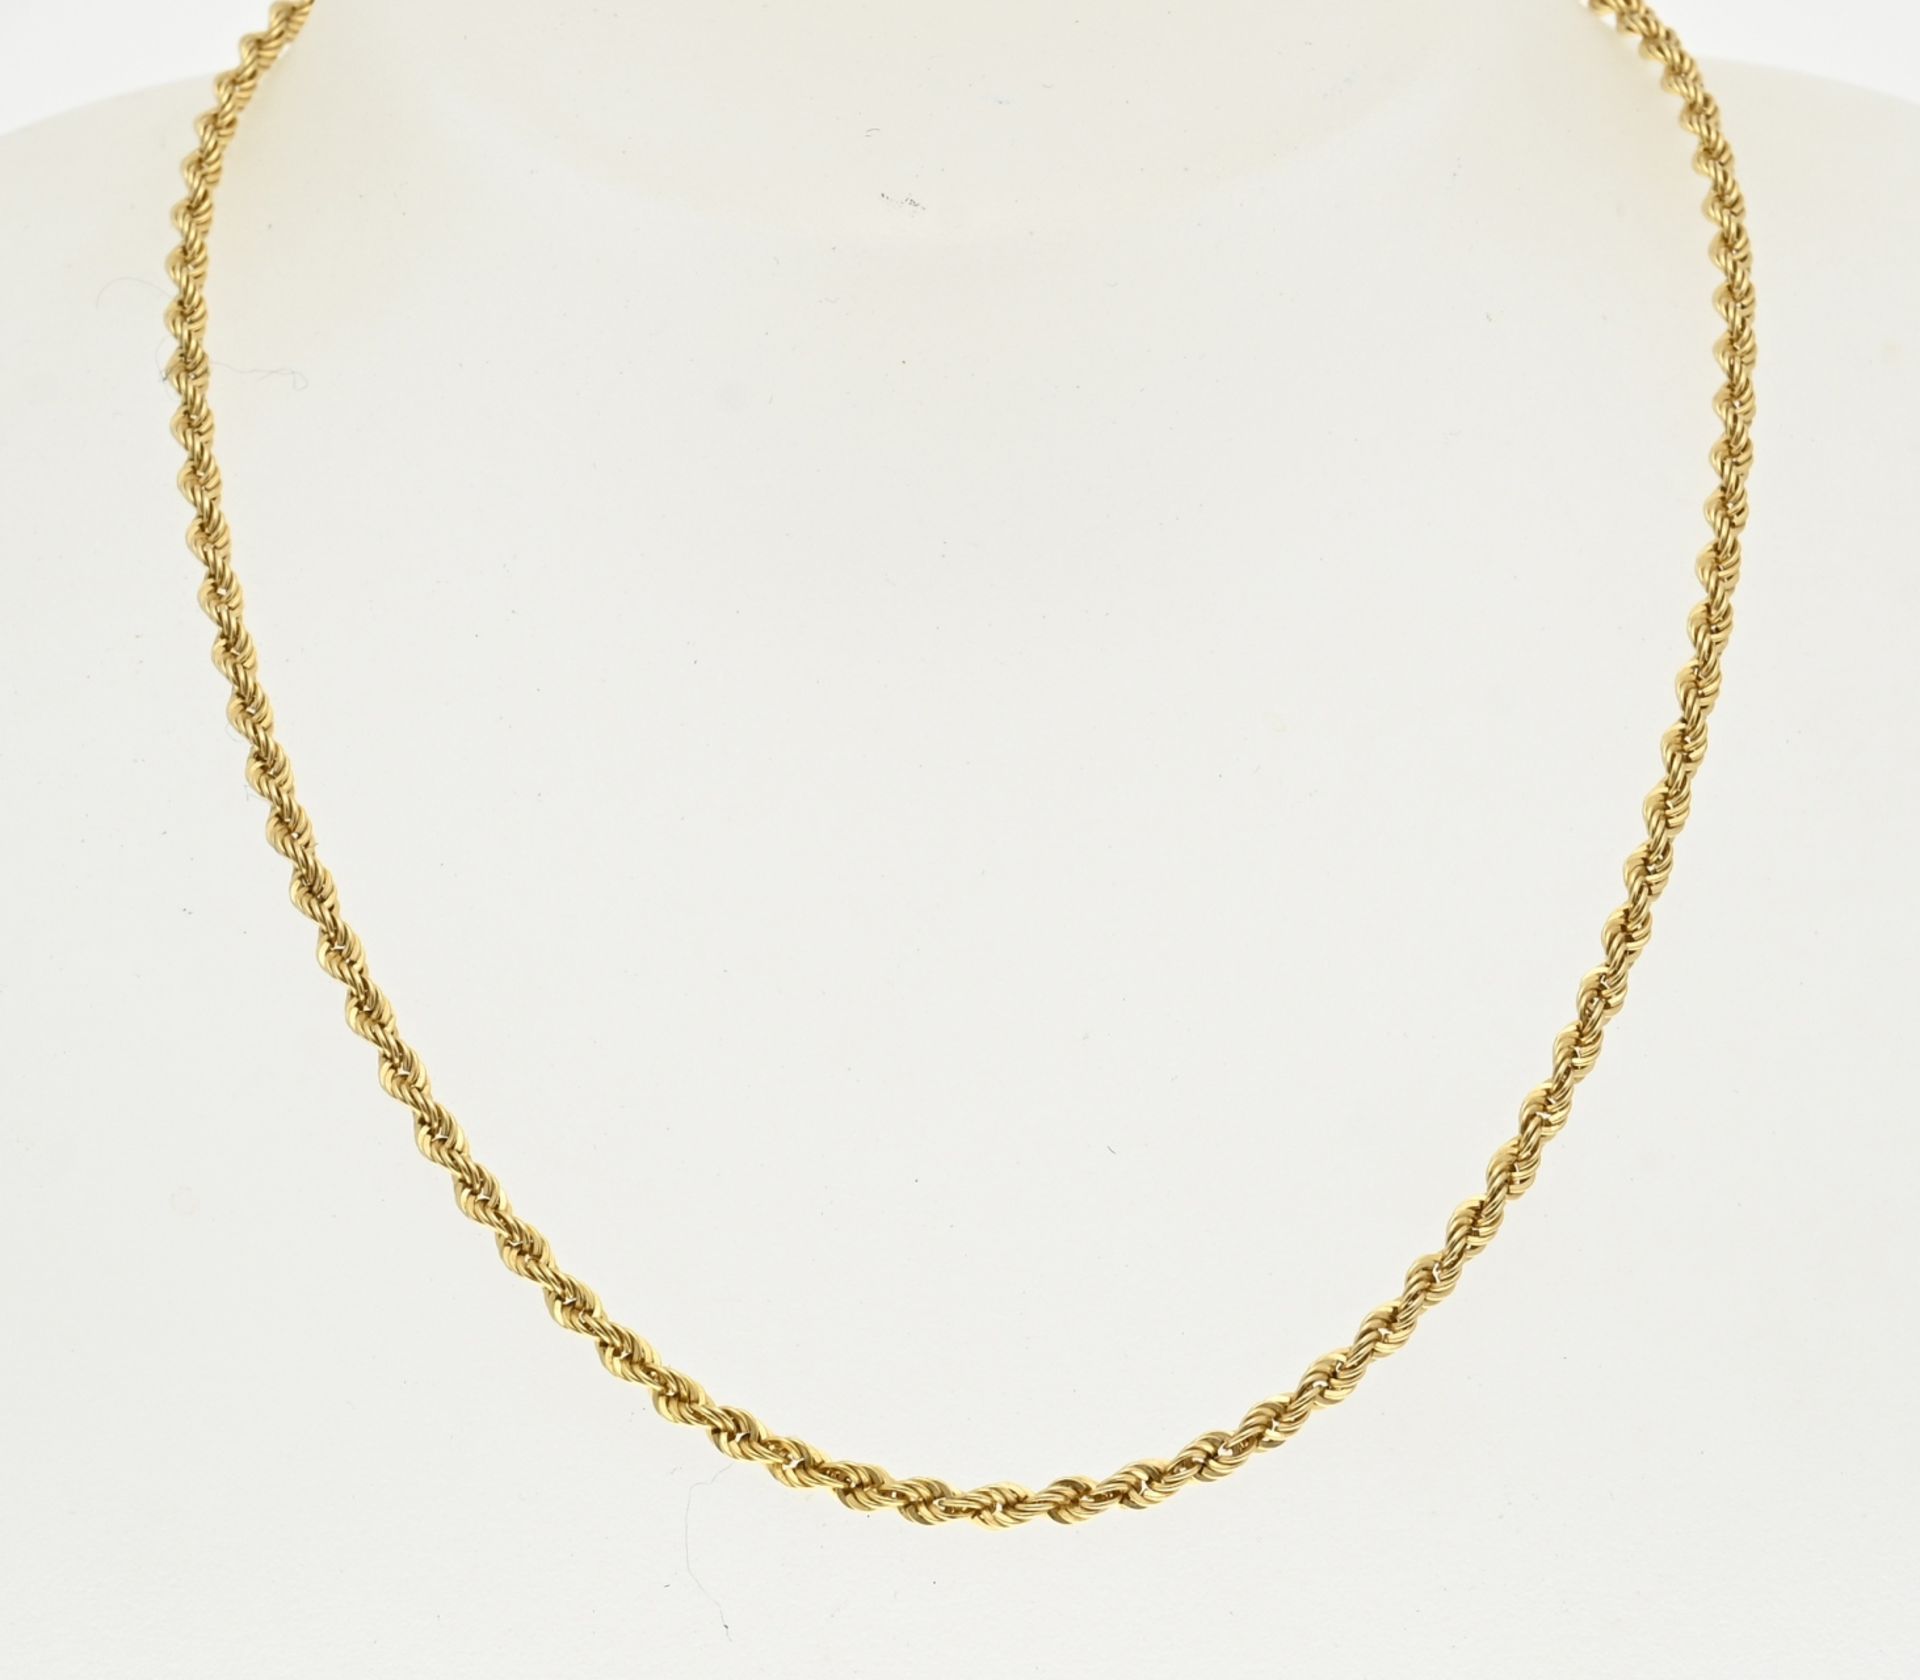 Gold cord necklace